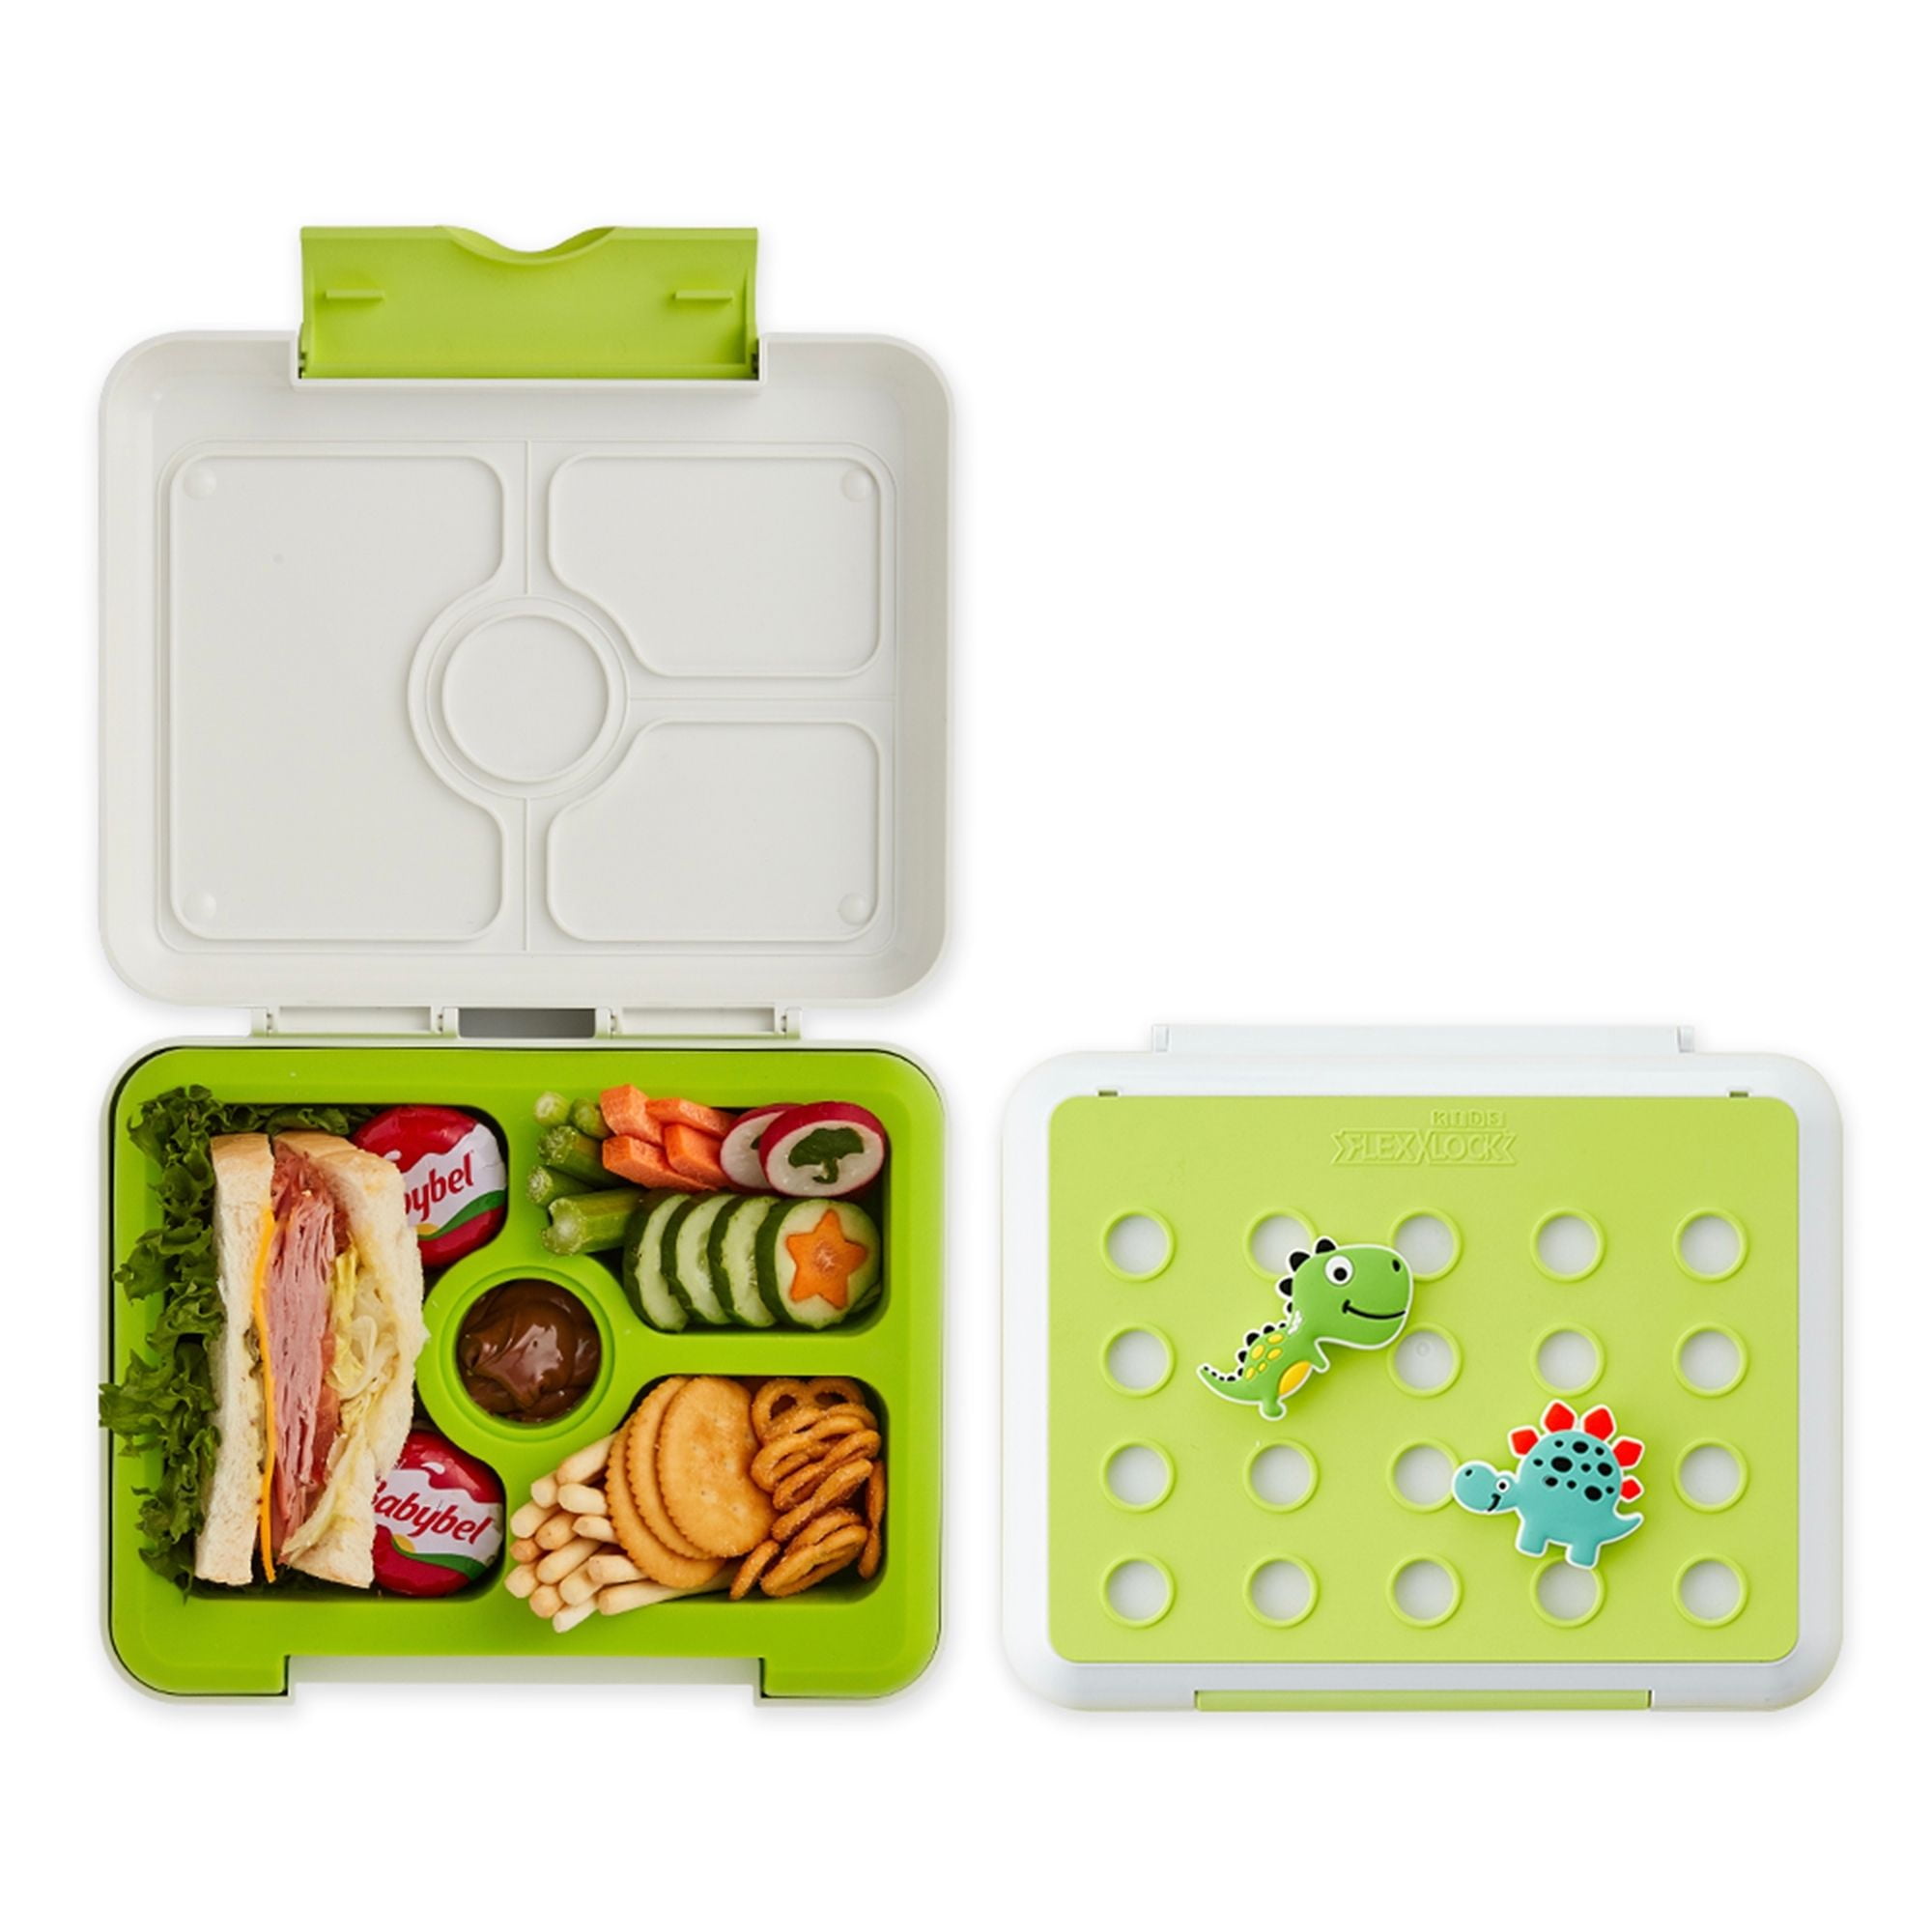 Nyte Nyte Baby Green Kids Bento Box 100% Food Grade Silicone Adults &  Toddler Lunch box W 3 Compartments- Microwave, Dishwasher & Freezer Safe-  Leak